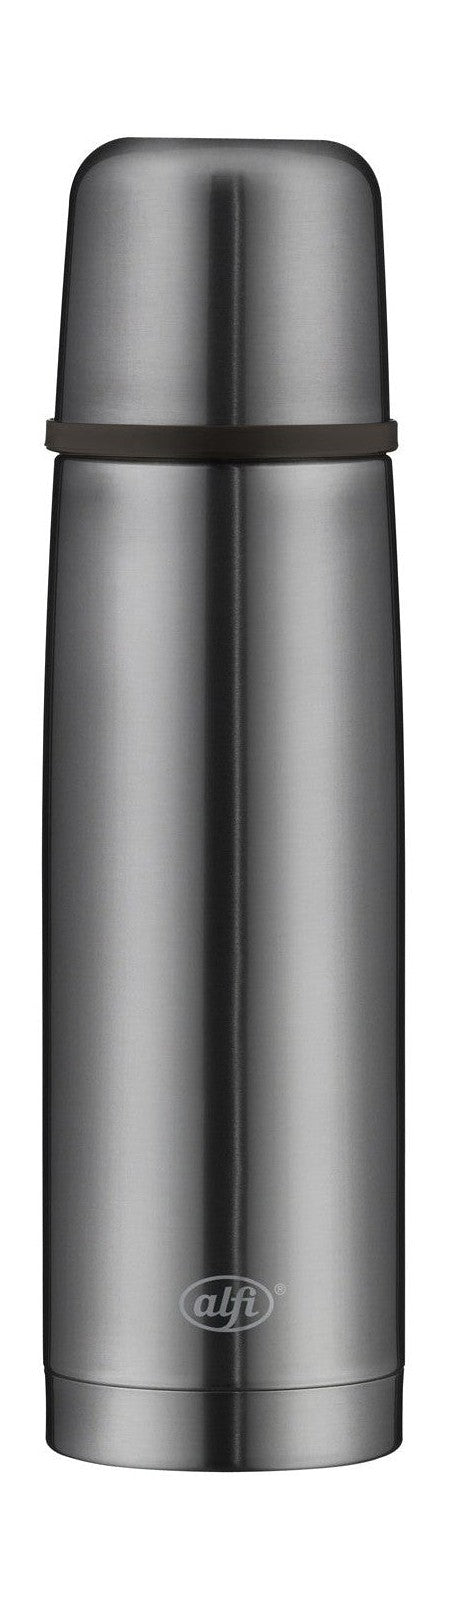 Alfi Iso Therm Perfect Thermo Bottle 0.75 Liter. Matte Cool Grey